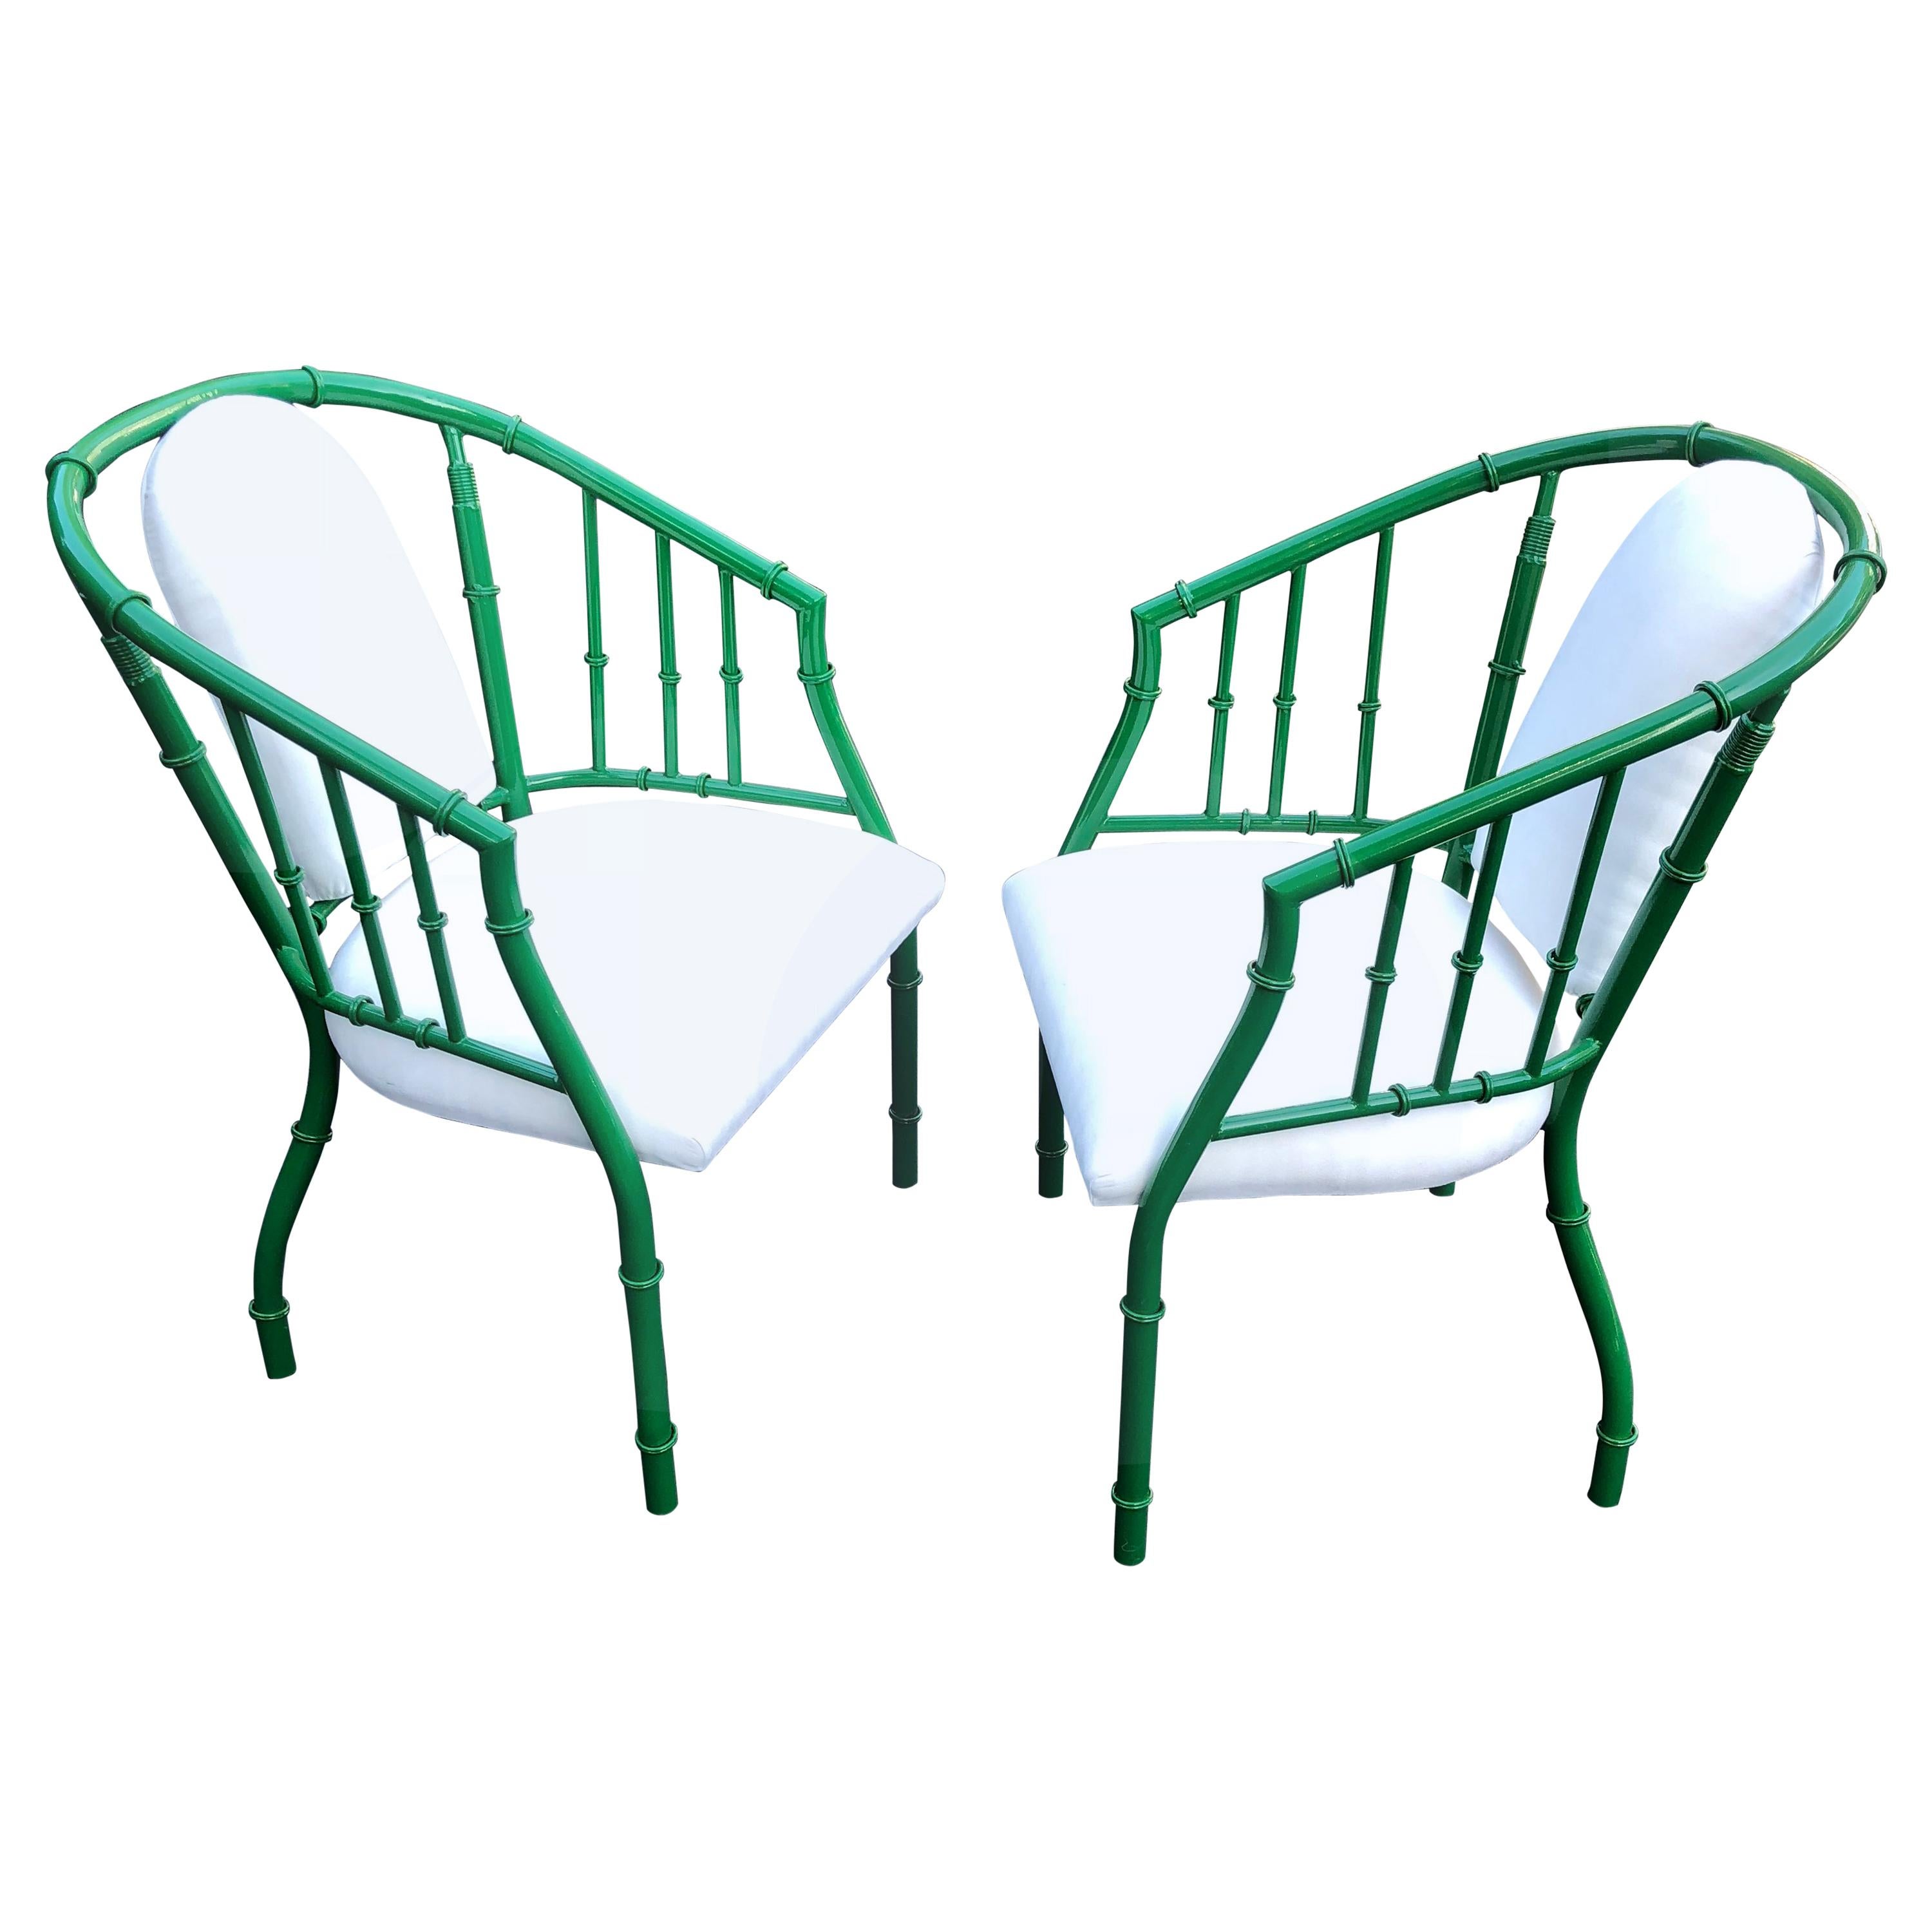 Pair of French green Mid-Century Modern faux bamboo metal armchairs
Newly powder-coated green, was original worn down chrome
Newly upholstered in a white faux suede.

DC, Philadelphia front door dealer delivery available.